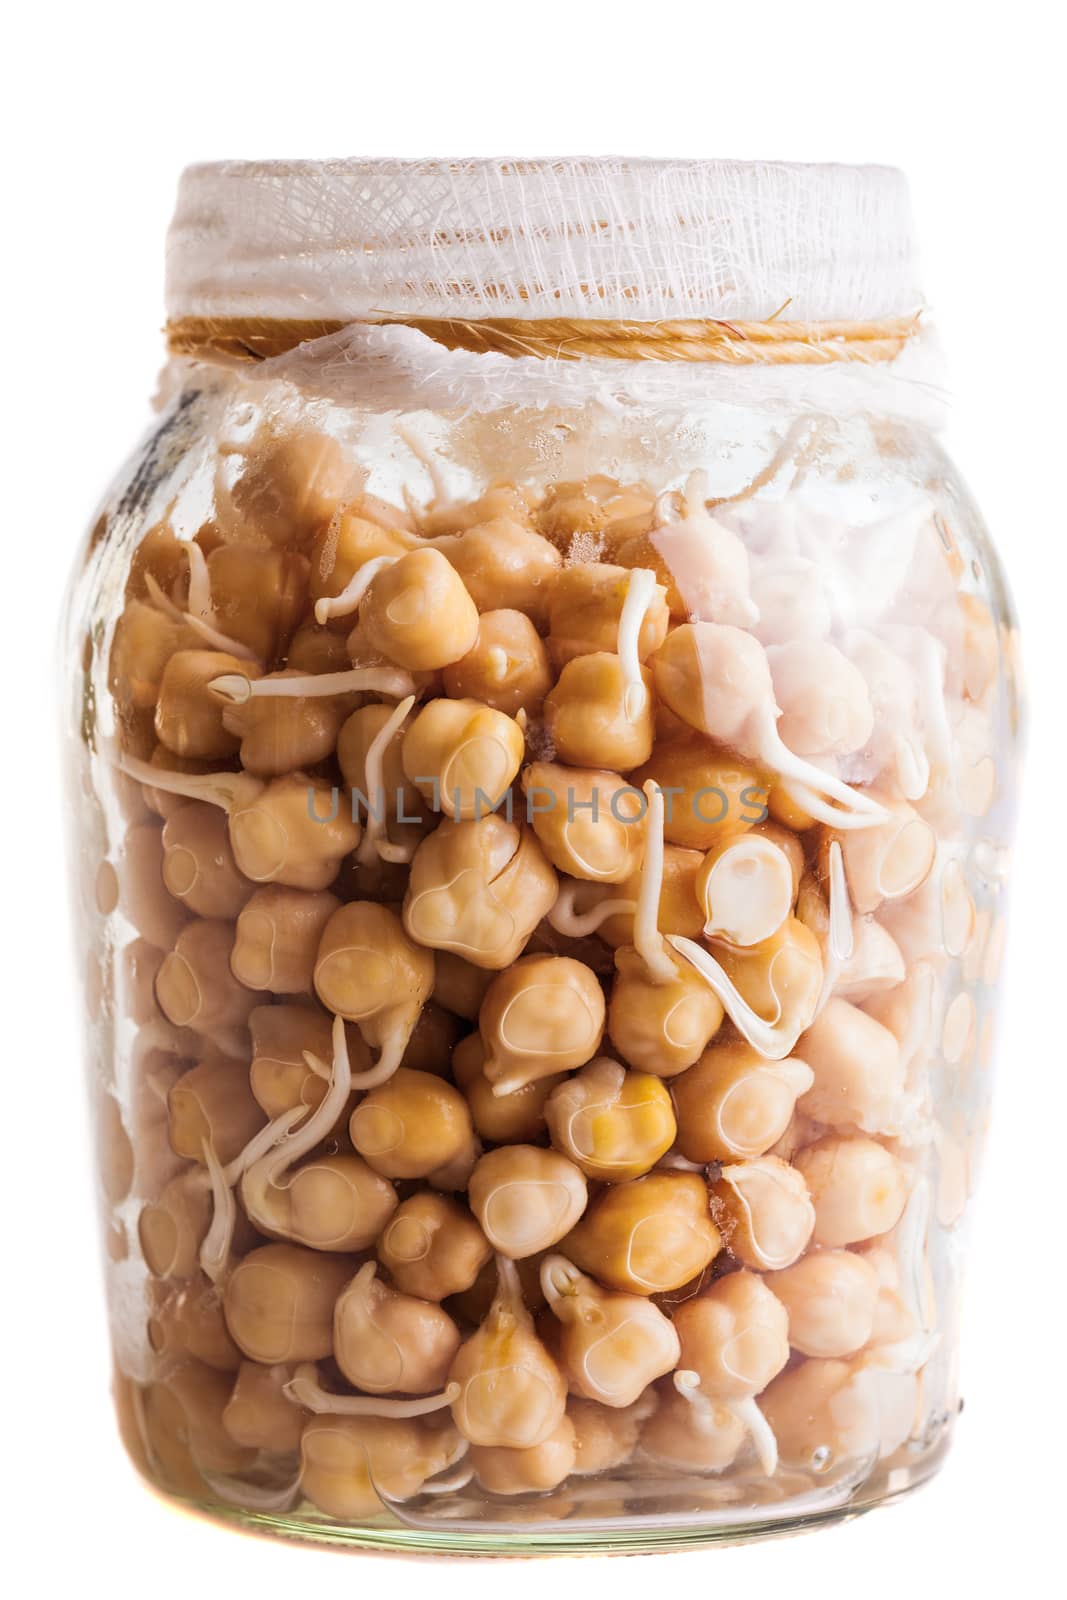 Sprouting Chickpeas Growing in a Glass Jar Isolated on White Background